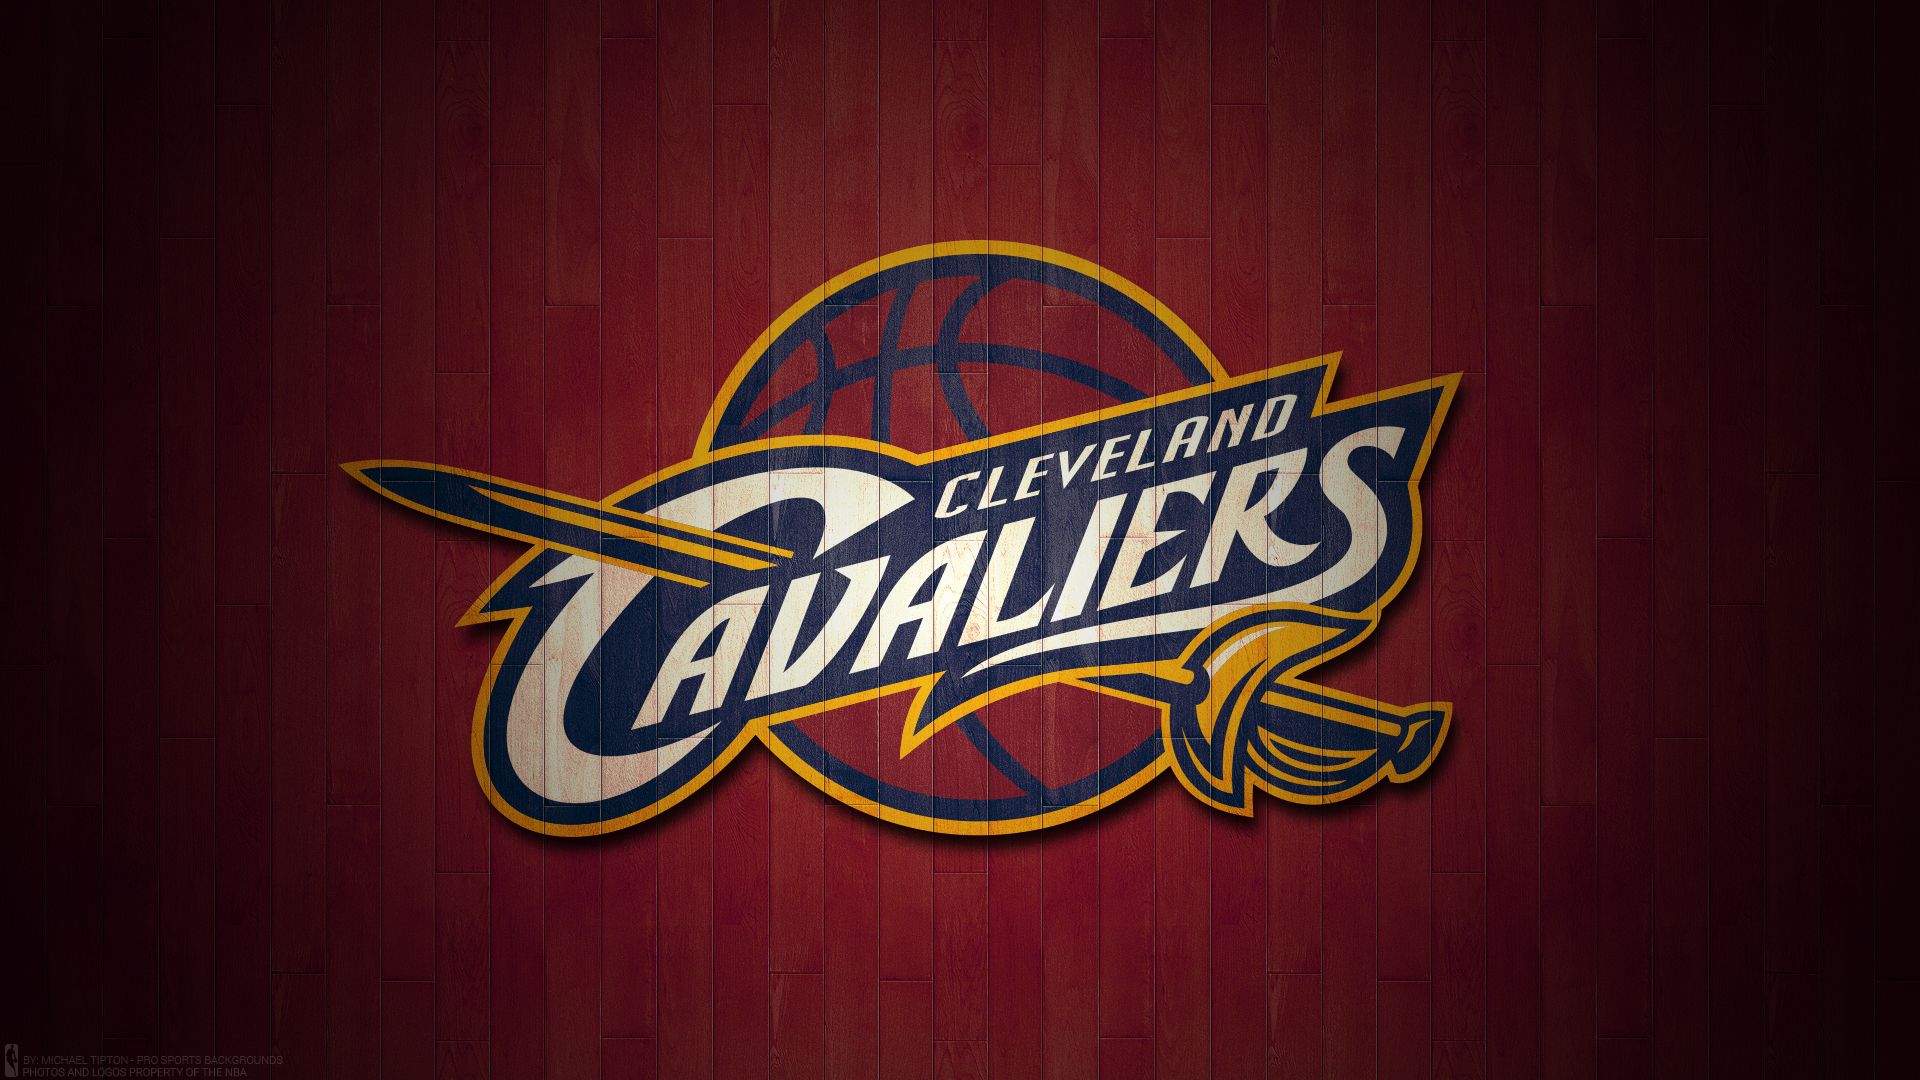 Download Cleveland Cavaliers wallpaper for mobile phone, free Cleveland Cavaliers HD picture